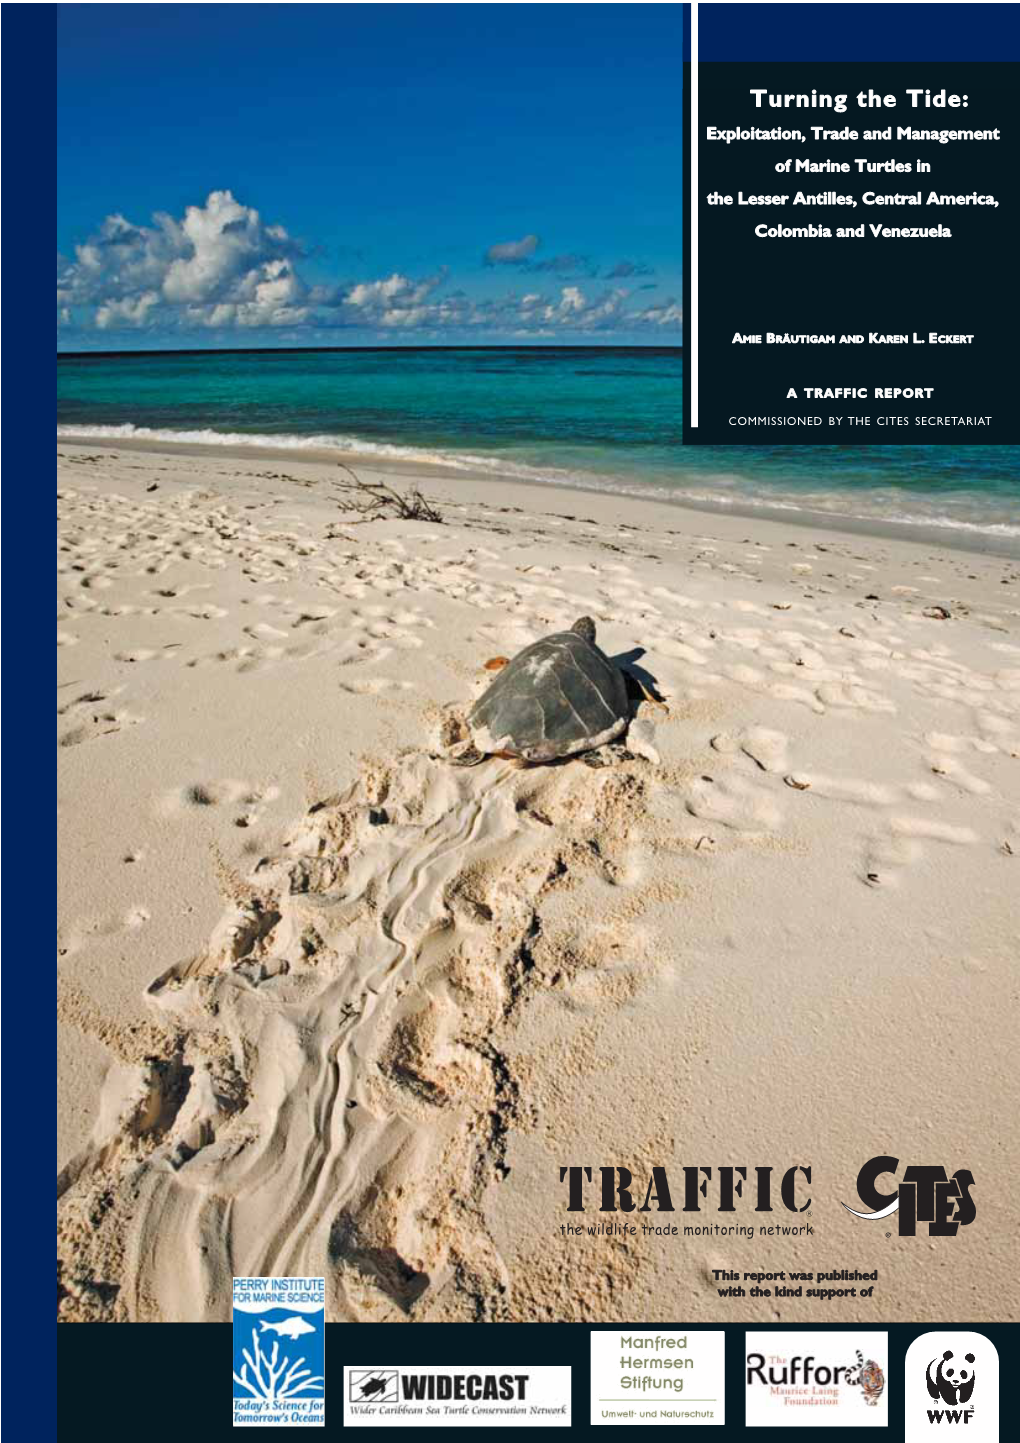 Exploitation, Trade & Management of Marine Turtles in the Lesser Antilles, Central America, Colombia and Venezuela (PDF